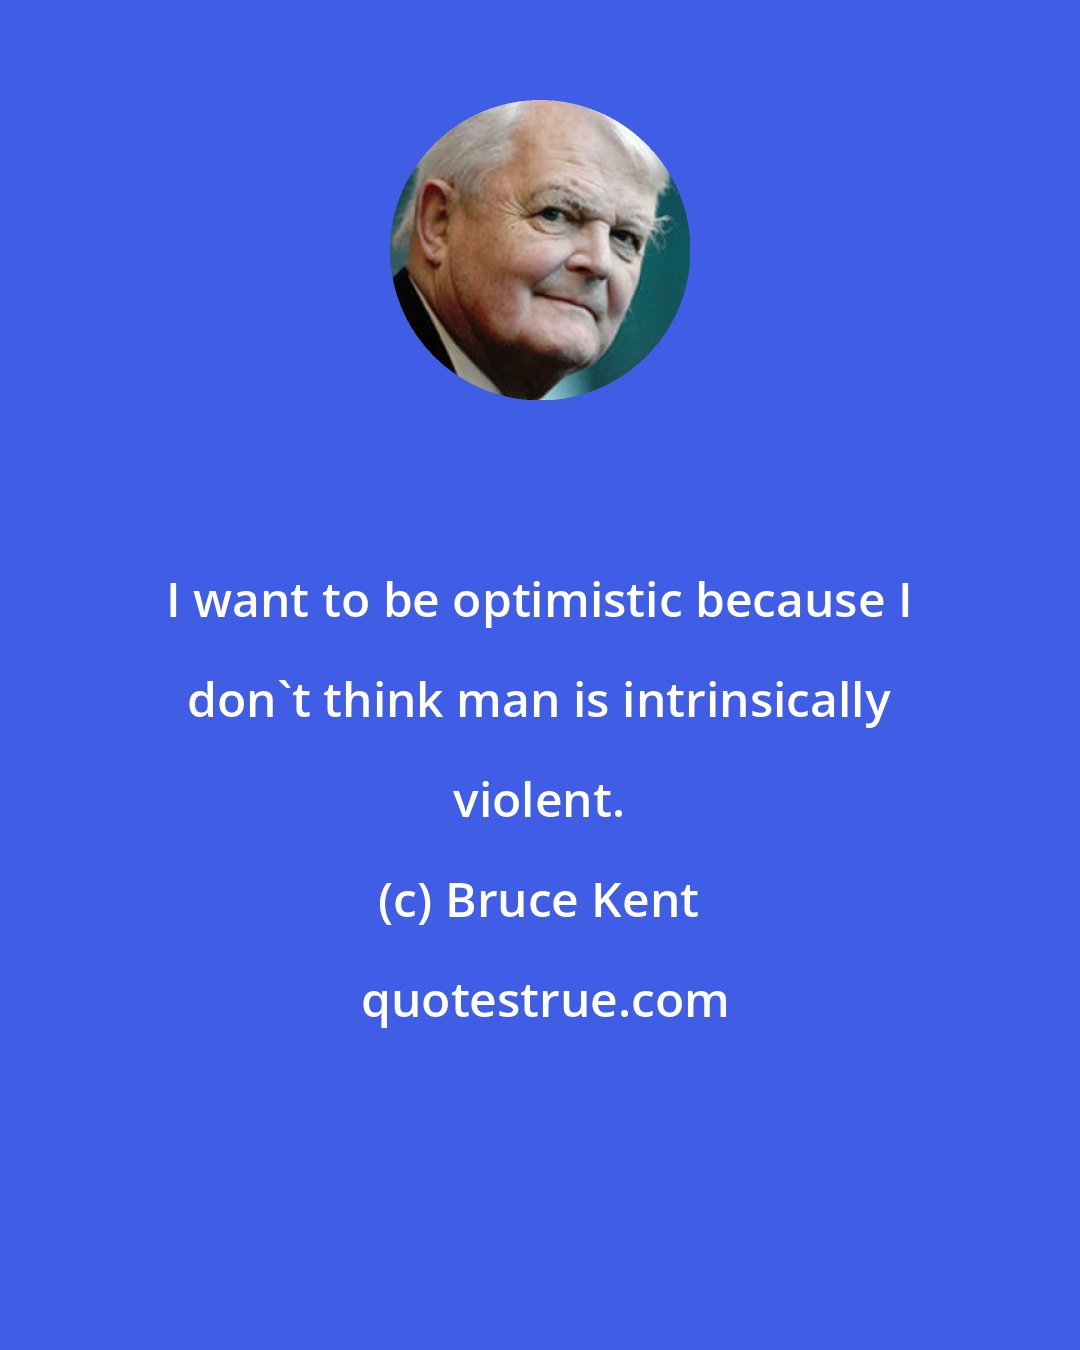 Bruce Kent: I want to be optimistic because I don't think man is intrinsically violent.